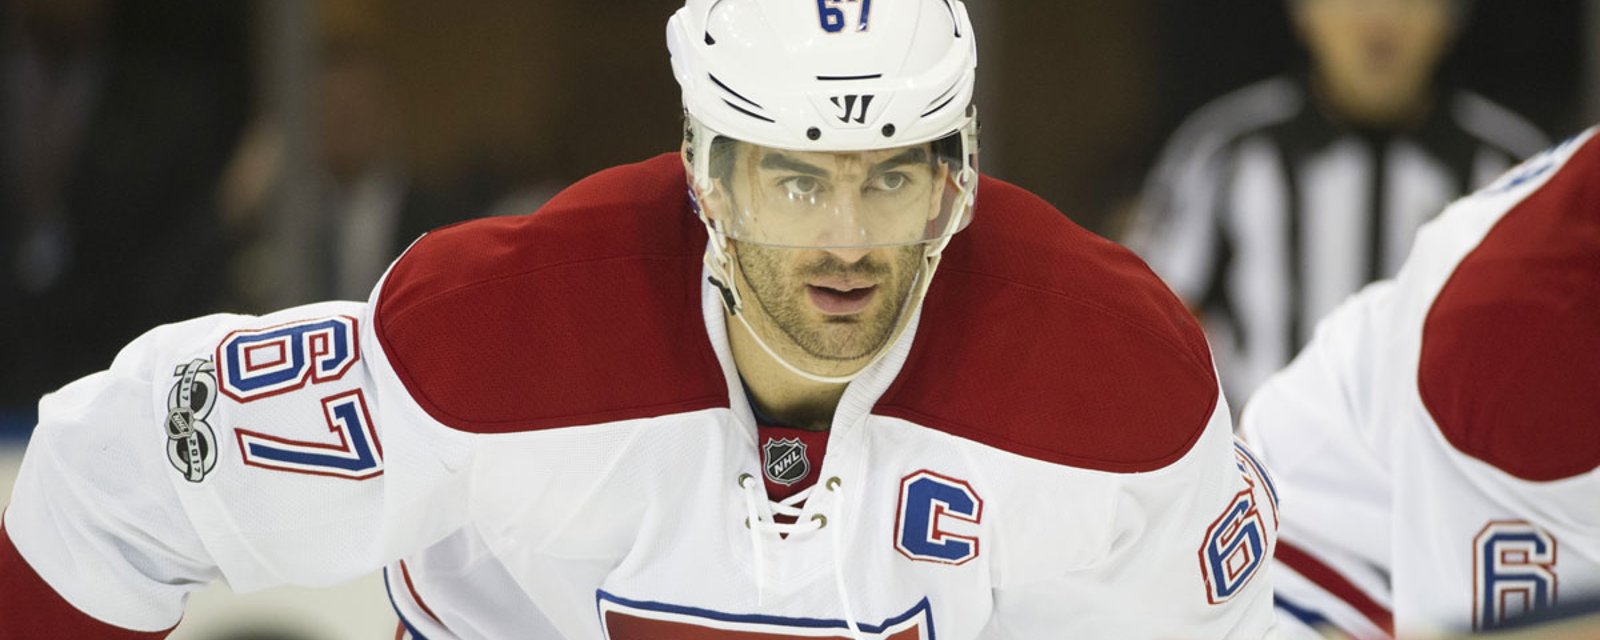 Pacioretty took one of the best decisions of his life 